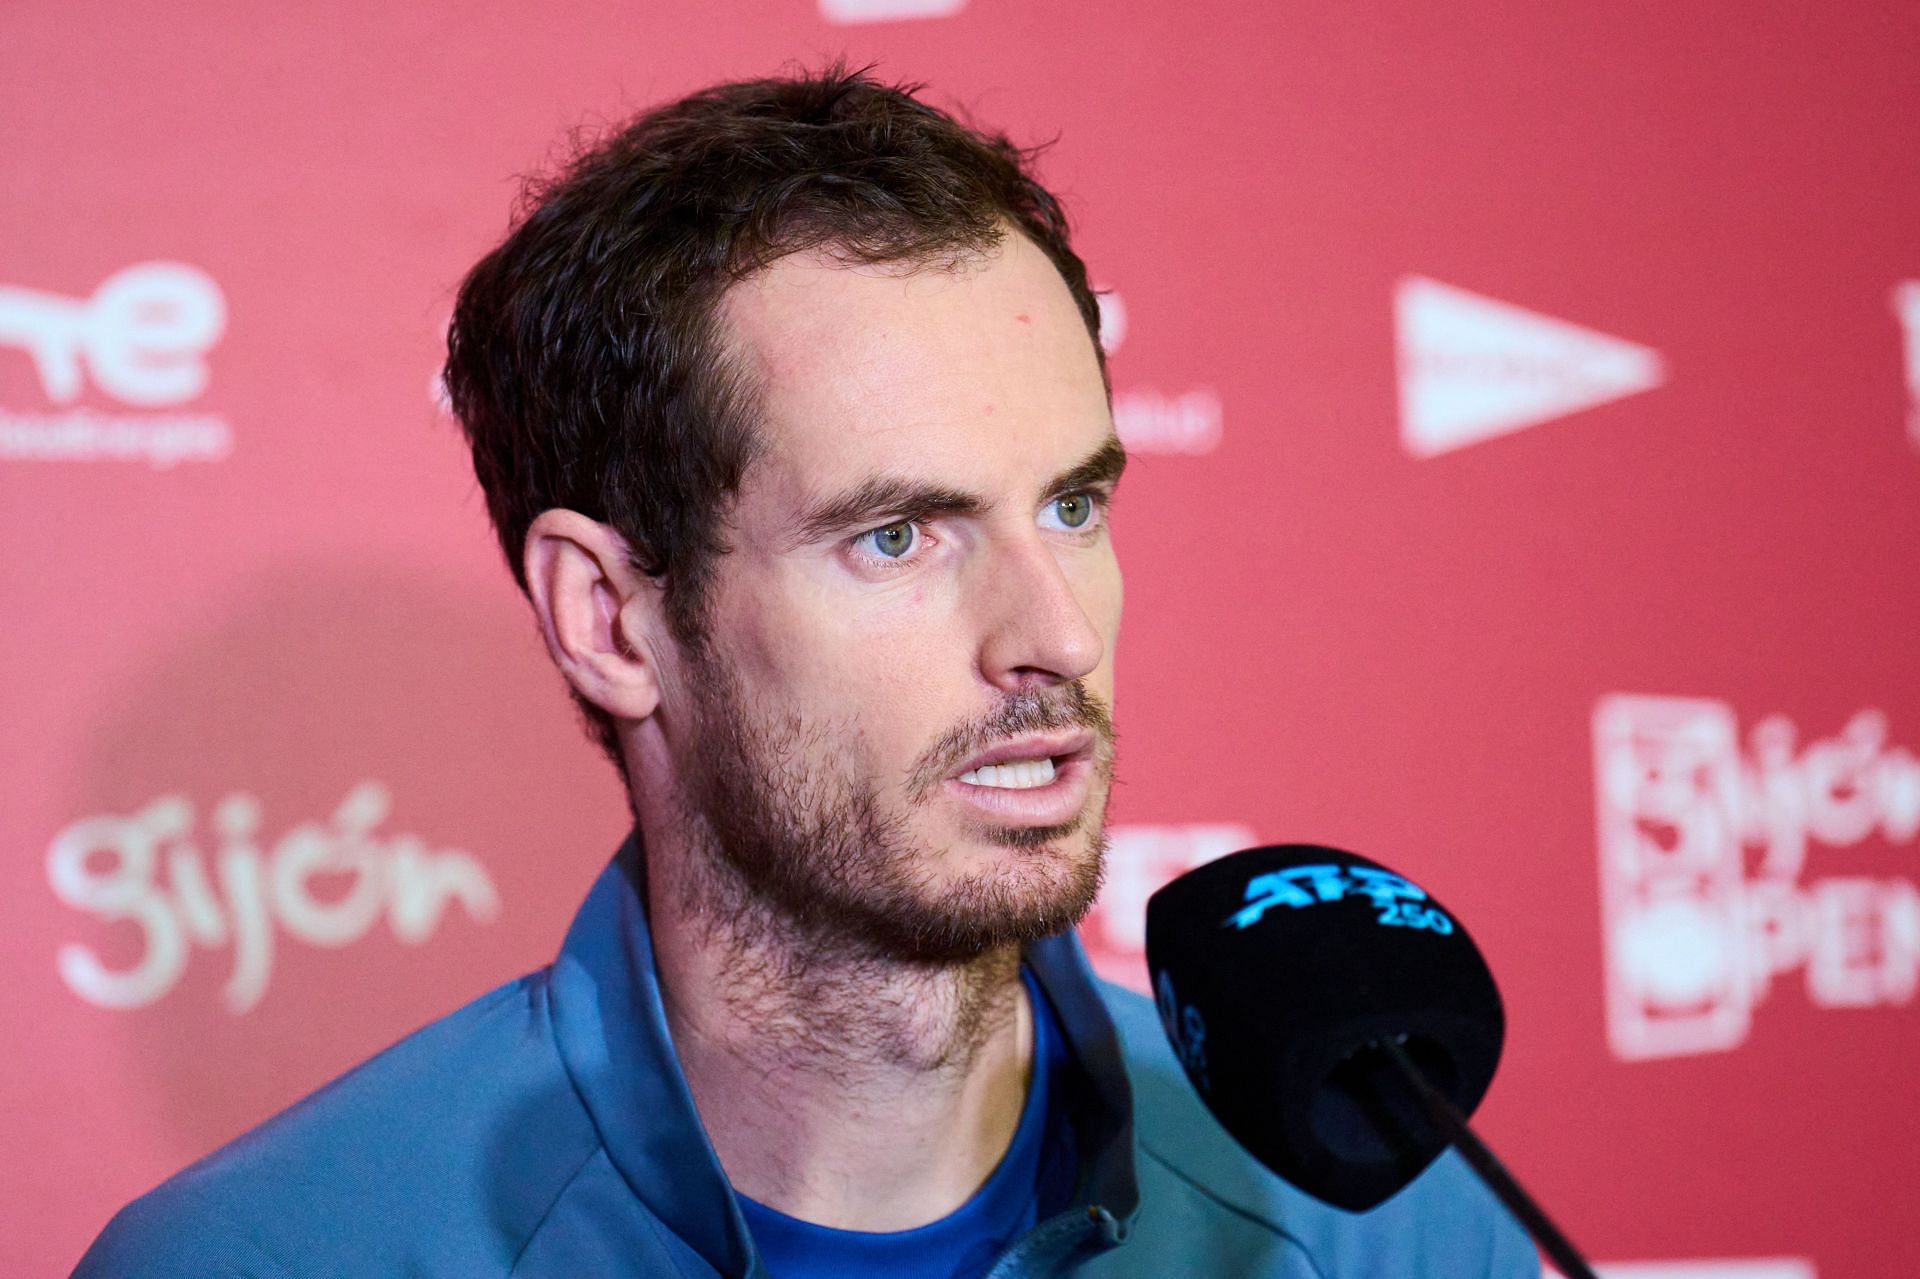 Andy Murray pictured at the Gijon Open.